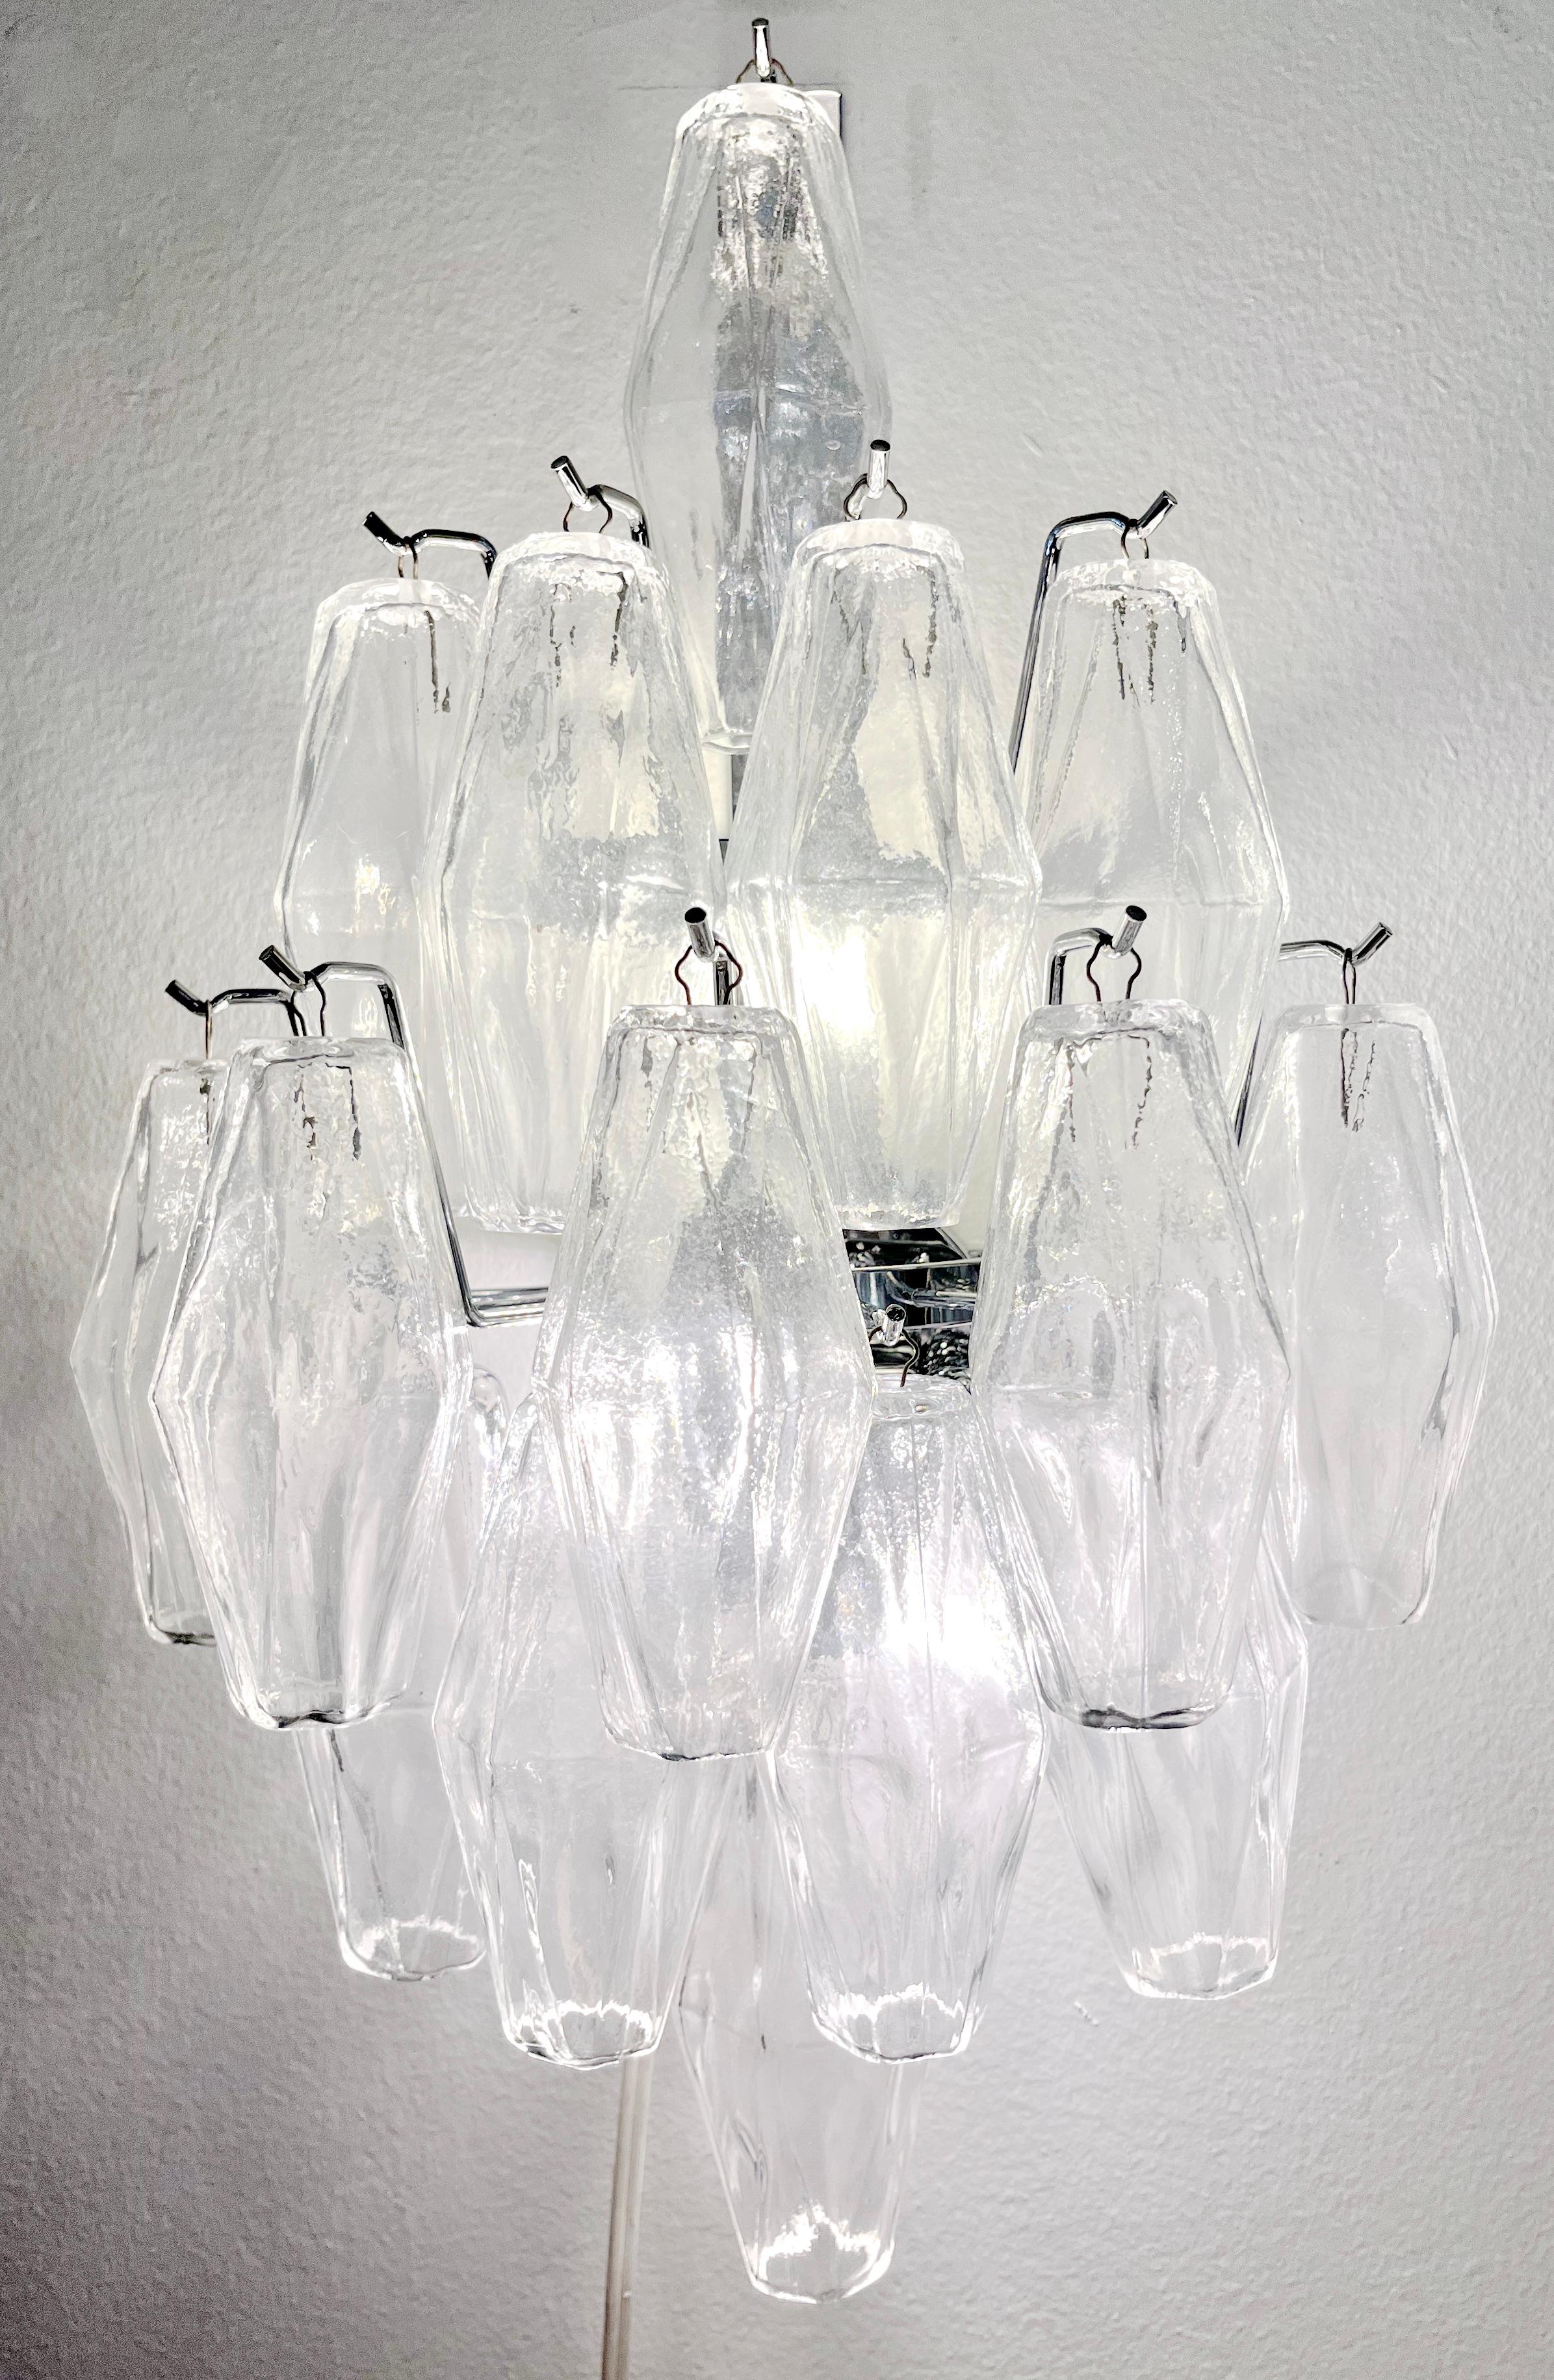 Modern Italian organic airy design cascading sconces, entirely handcrafted, in Art Deco style. The blown polyhedral elements in crystal clear Murano glass are layered in multi-levels on a handmade nickel structure. The light is diffused through the